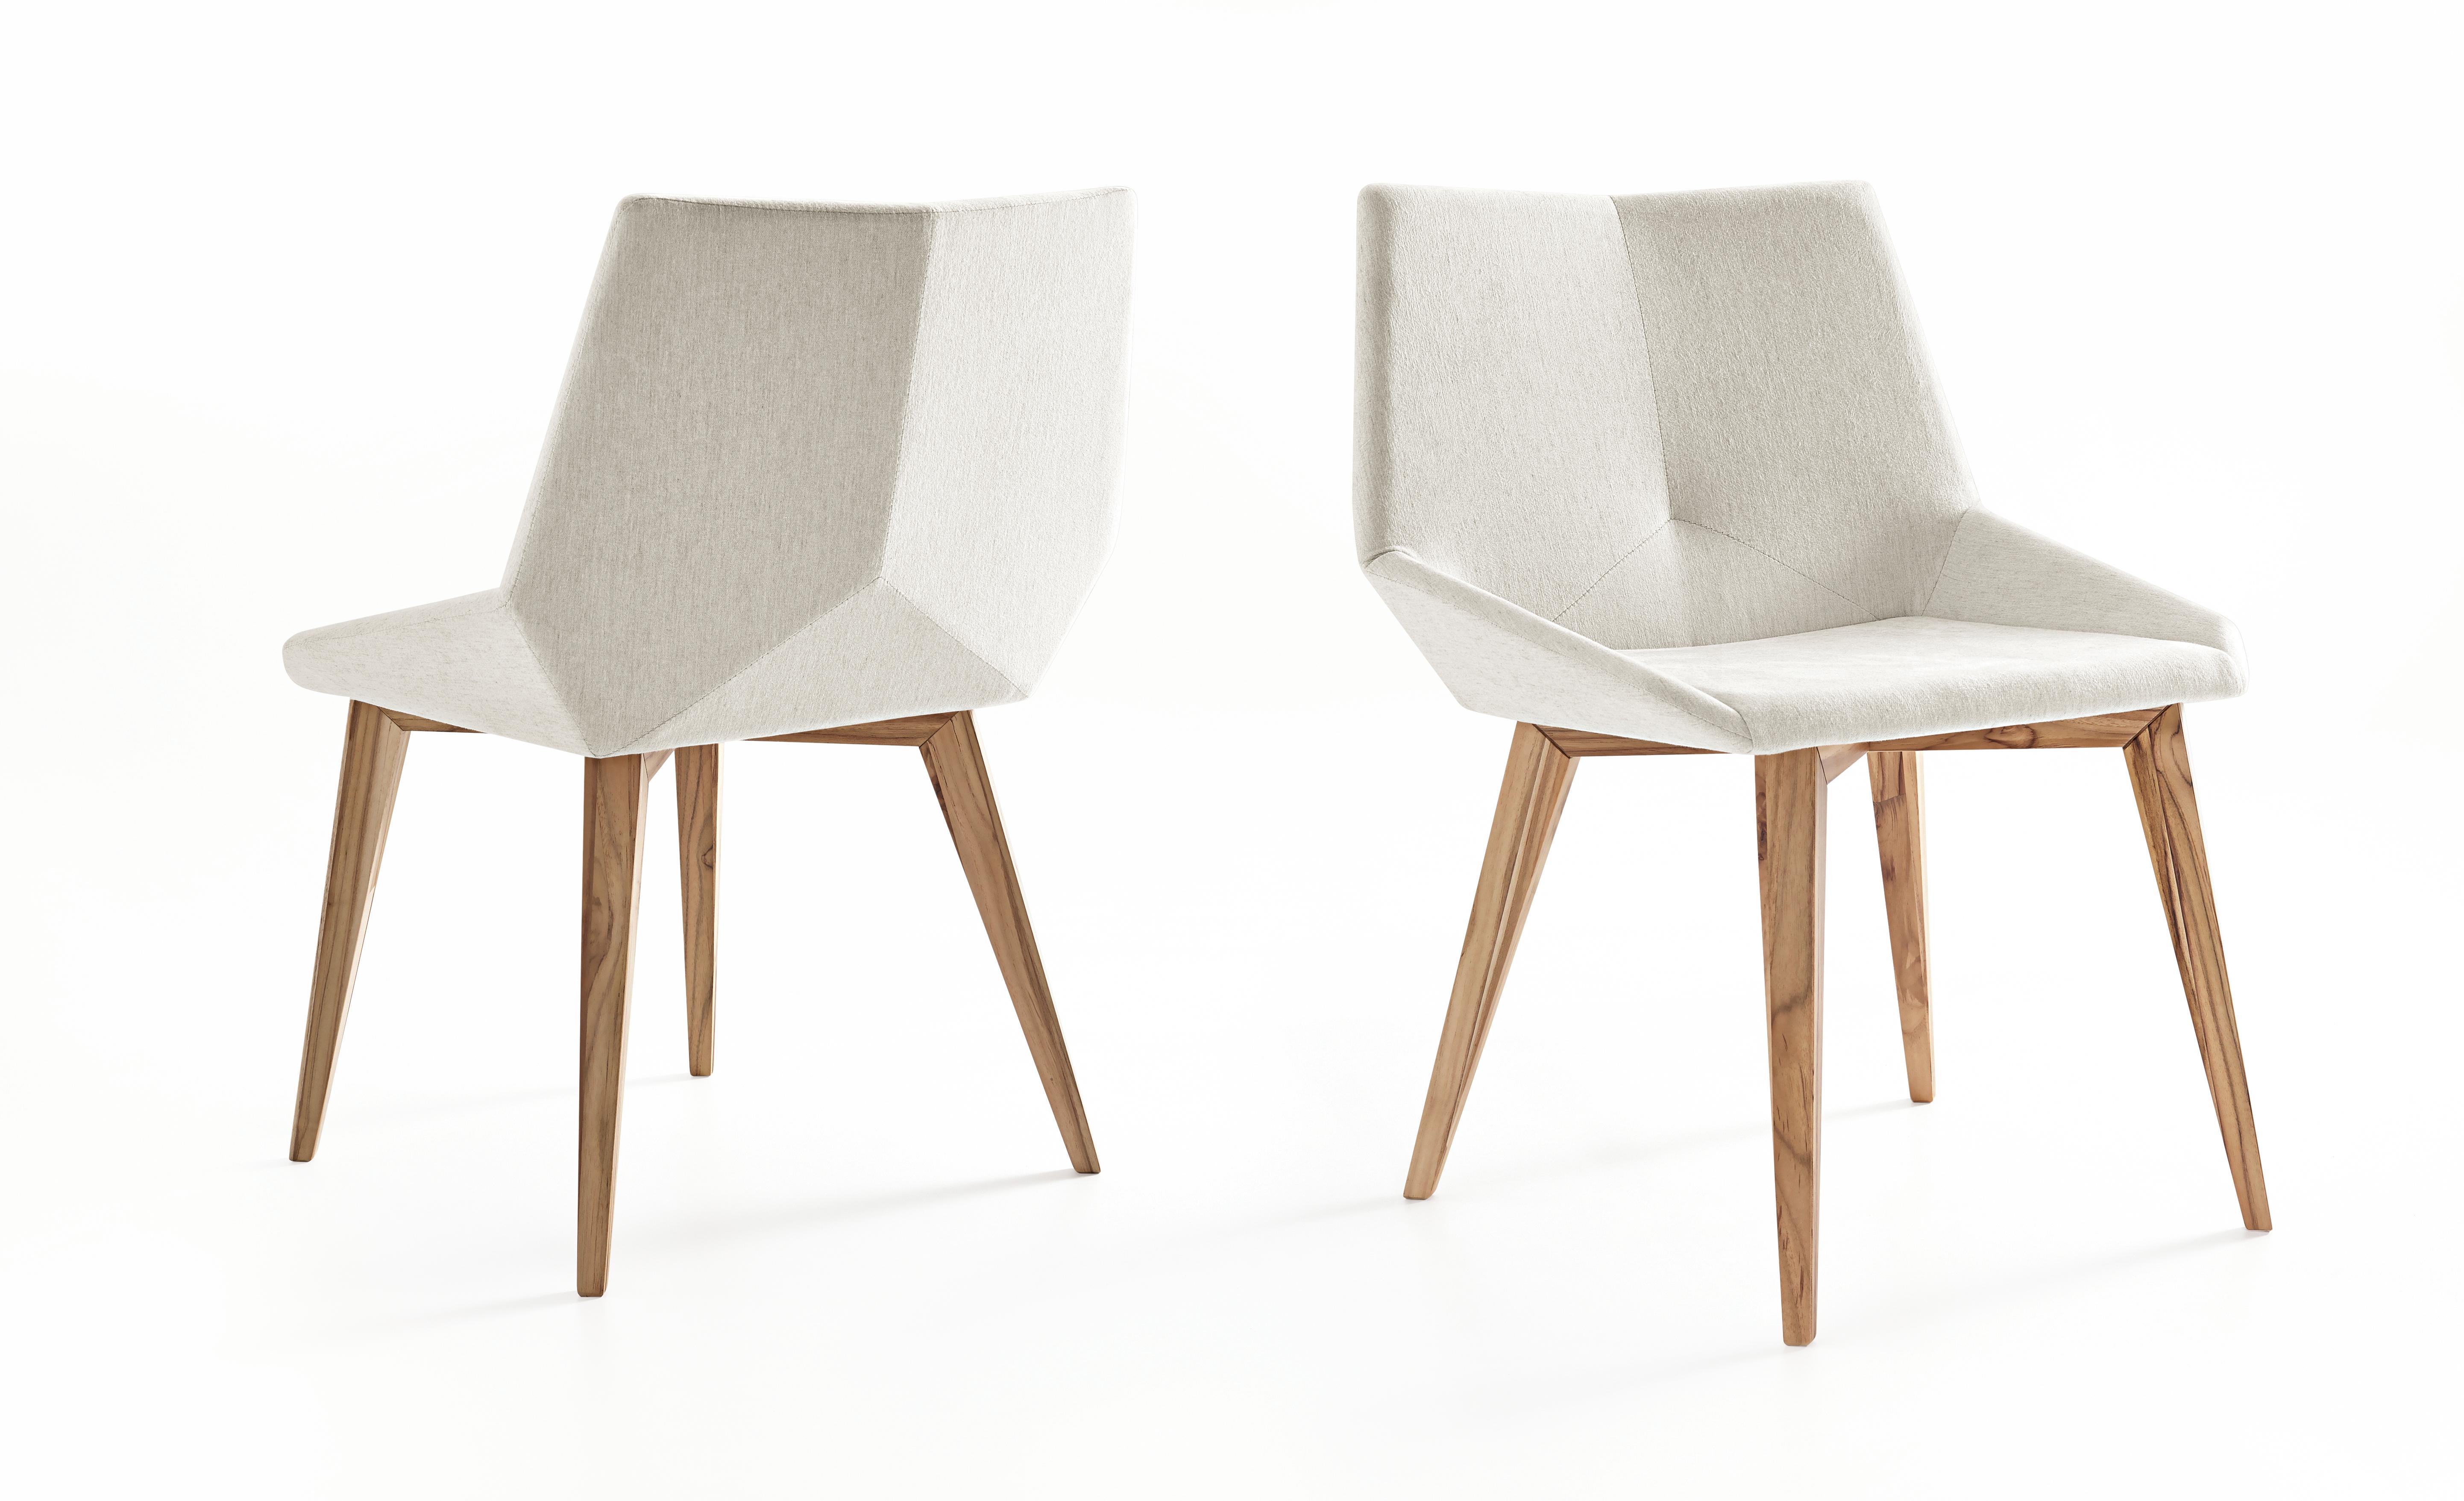 The Geometric dining chair as the name says has geometric shapes and pure lines with its teak wooden legs with the seat all wrapped in a beautiful and soft ivory fabric. All of these small details thought by architects and designers by our Uultis